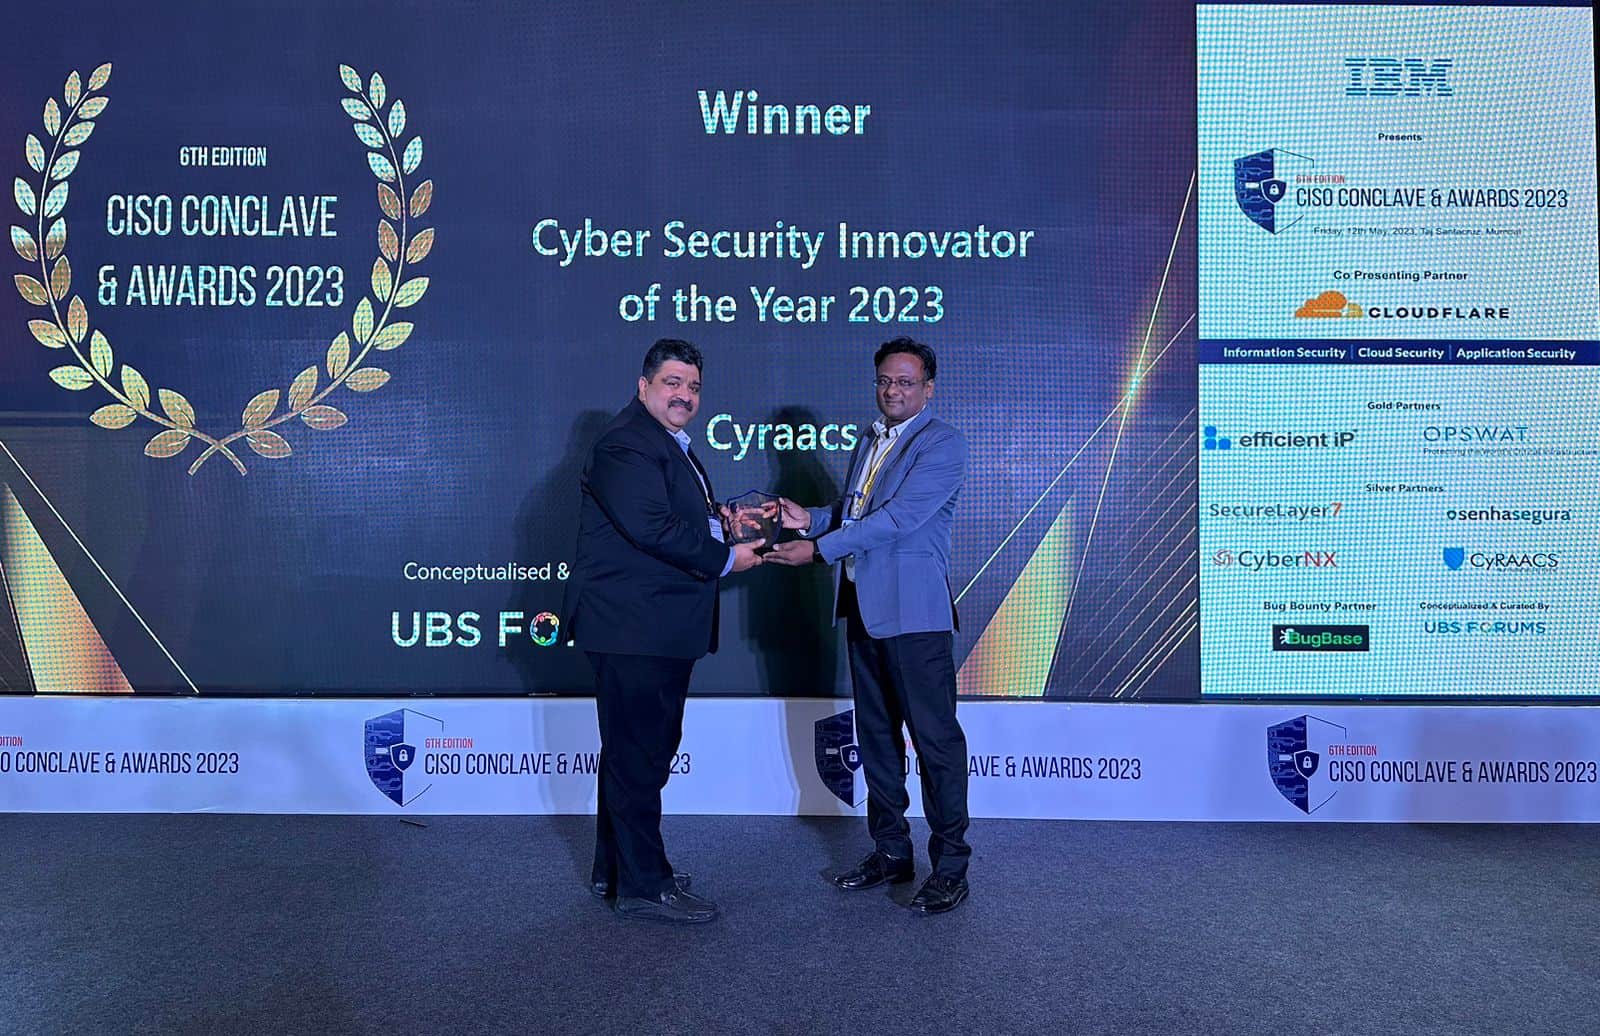 Cyber-Security-Innovator-of-the-Year-6th-Edition-CISO-Conclave-Awards-2023